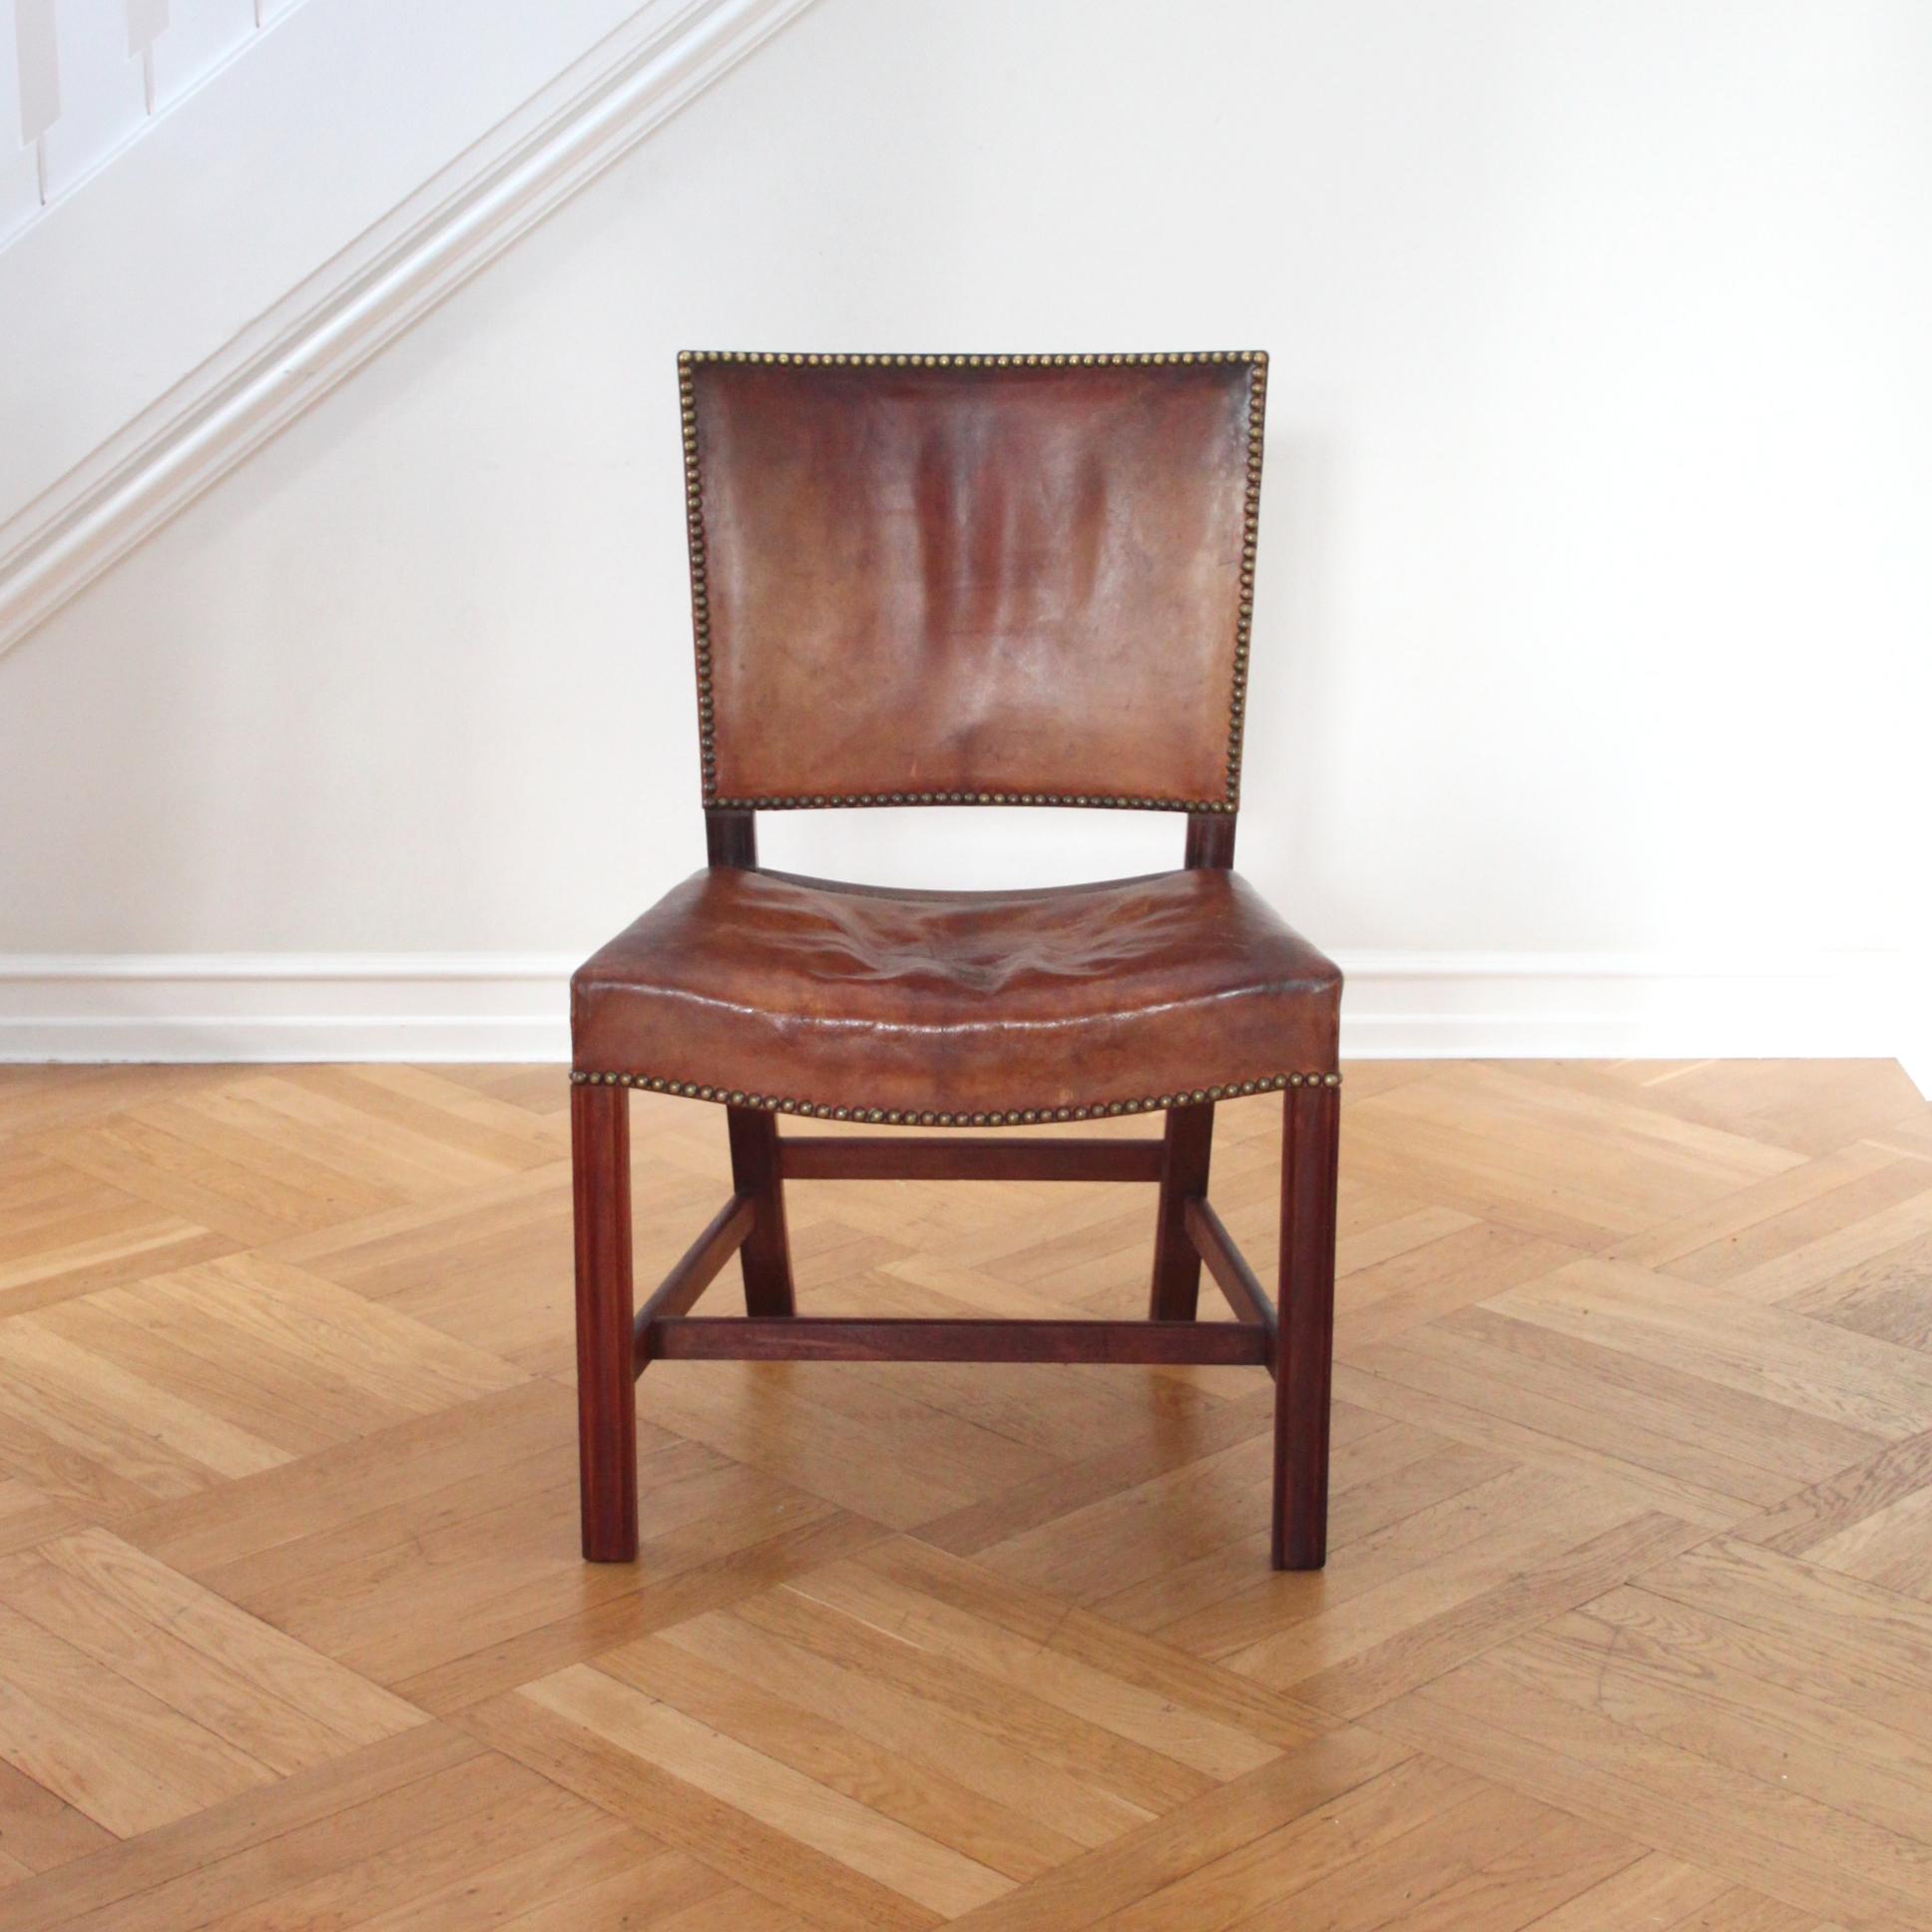 Kaare Klint & Rud Rasmussen - Scandinavian Modern

A beautiful Kaare Klint 'Red Chair' or 'Barcelona Chair' by Kaare Klint with deep patina in original Niger leather, profiled legs of mahogany and brass nails.

These examples made circa 1930s by